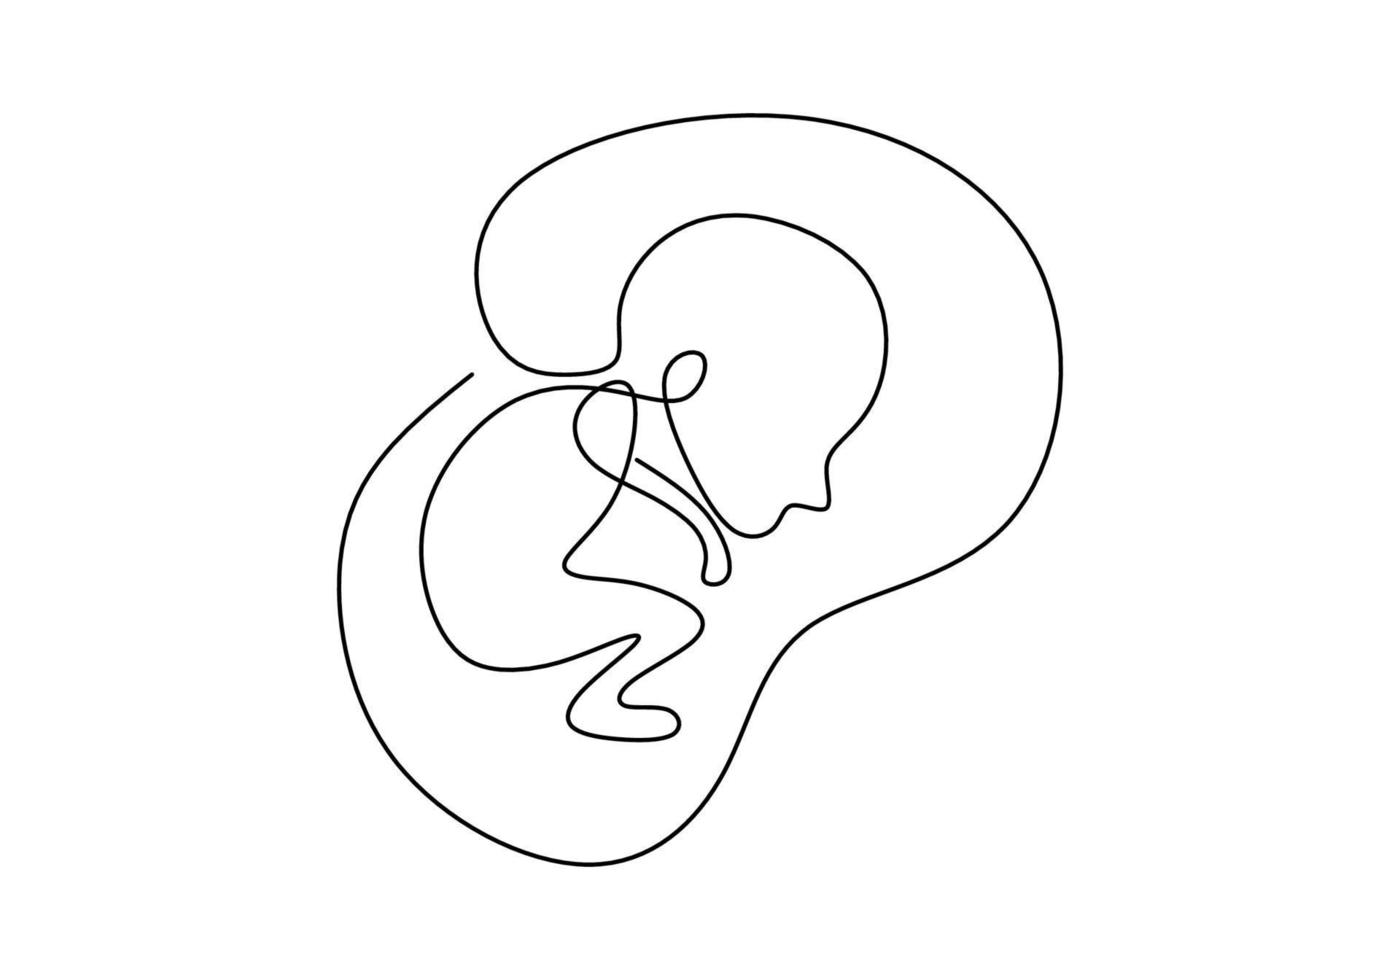 Baby in womb one single line drawing. Cute unborn fetus baby on mother womb isolated on white background. Pregnancy health care concept. Minimalism style. Vector sketch illustration